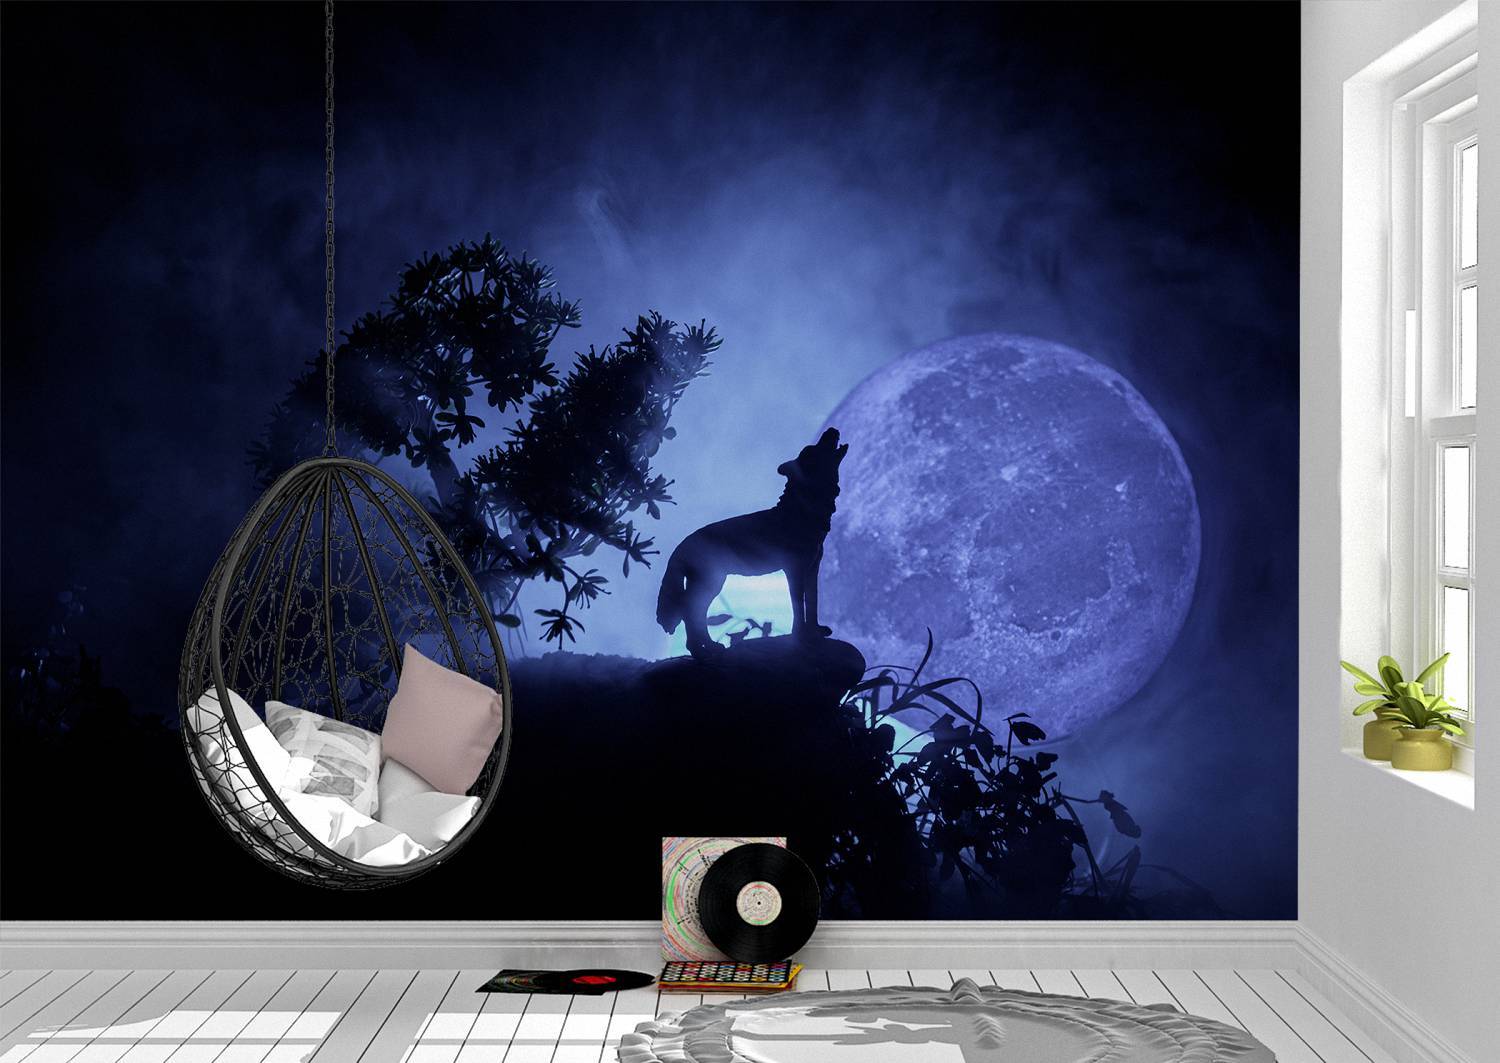 The Wolf Howling to the Moon Wall Mural Photo Wallpaper UV Print Decal Art Décor